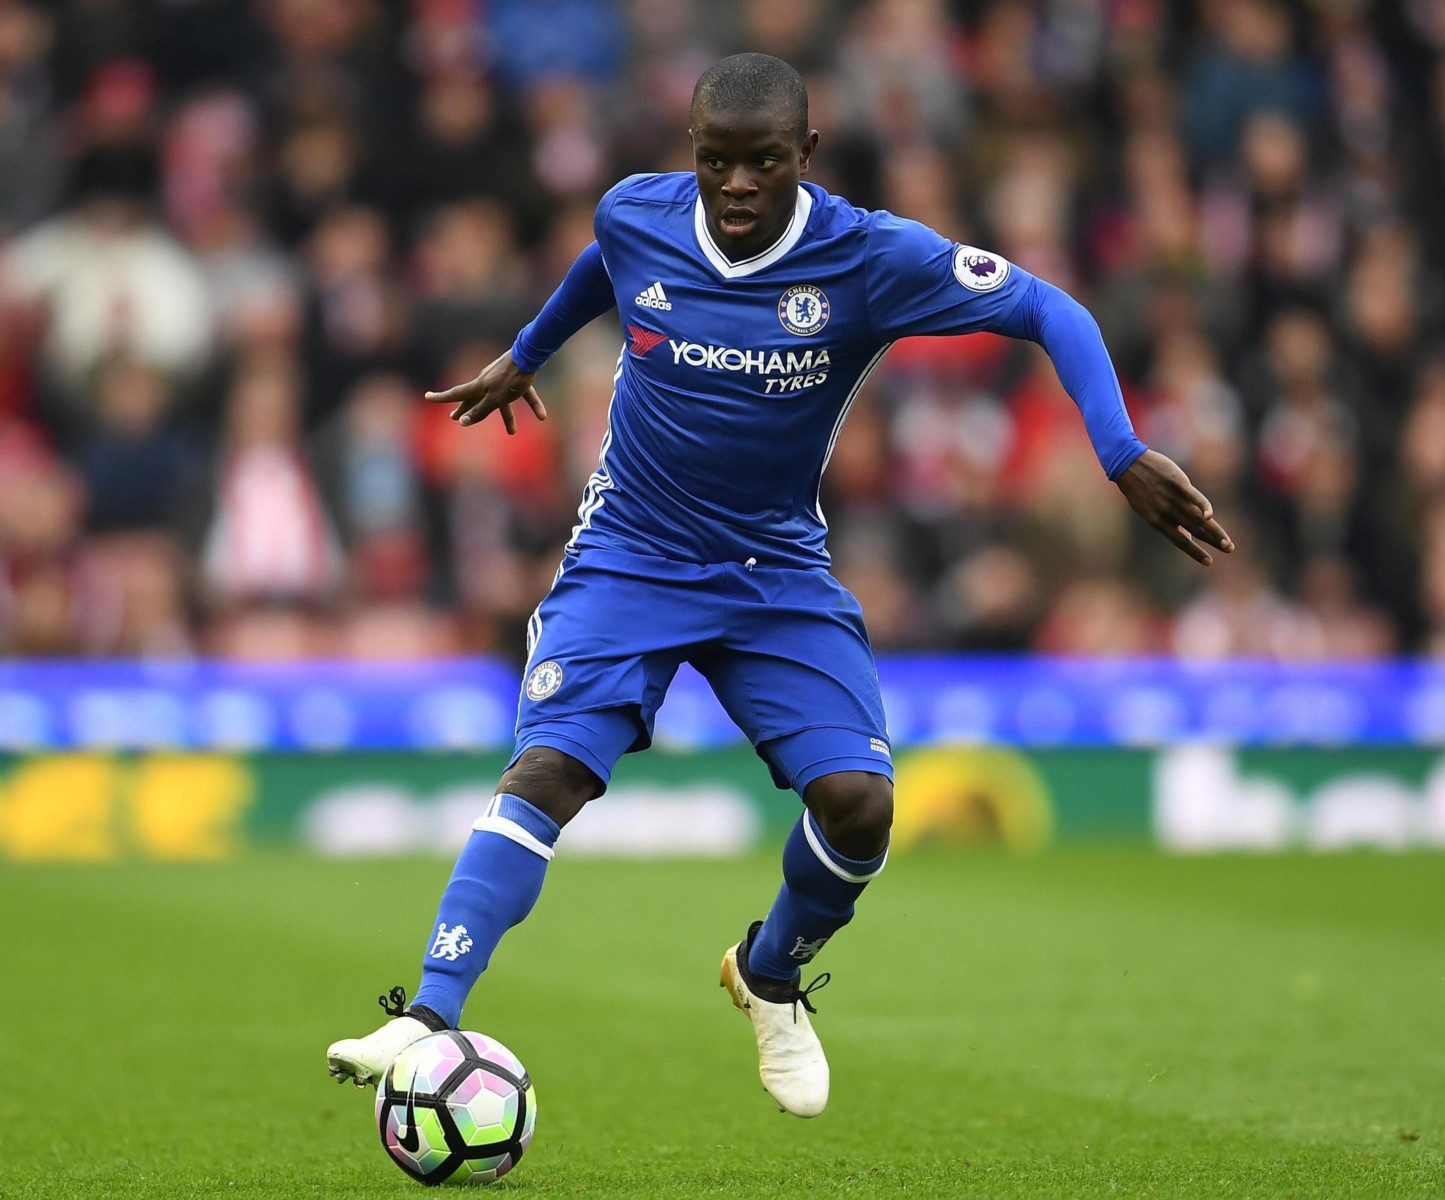 Chelsea star NGolo Kante takes his place in midfield